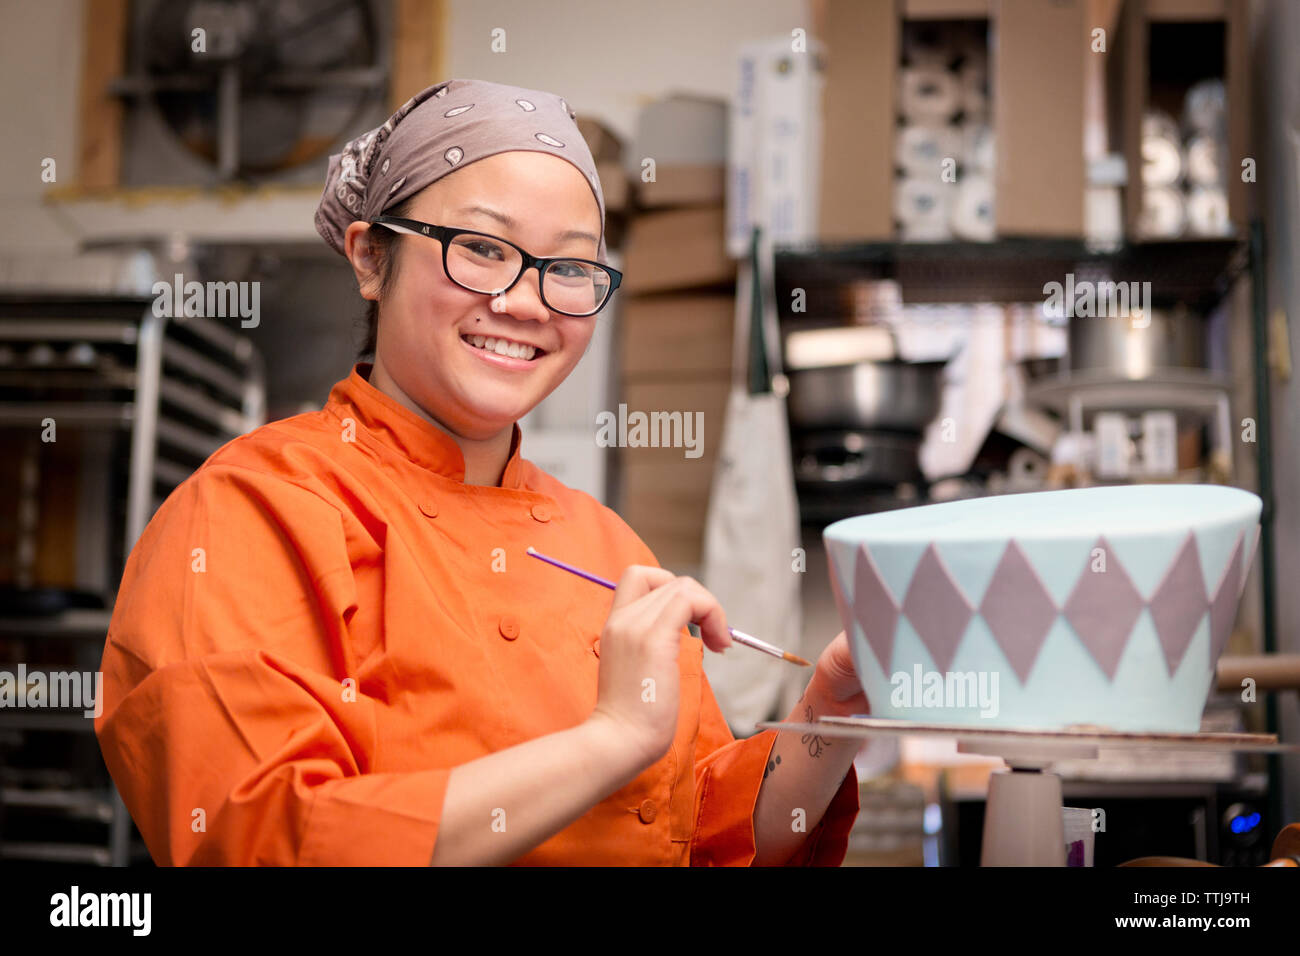 Portrait of woman decorating cake at store Stock Photo